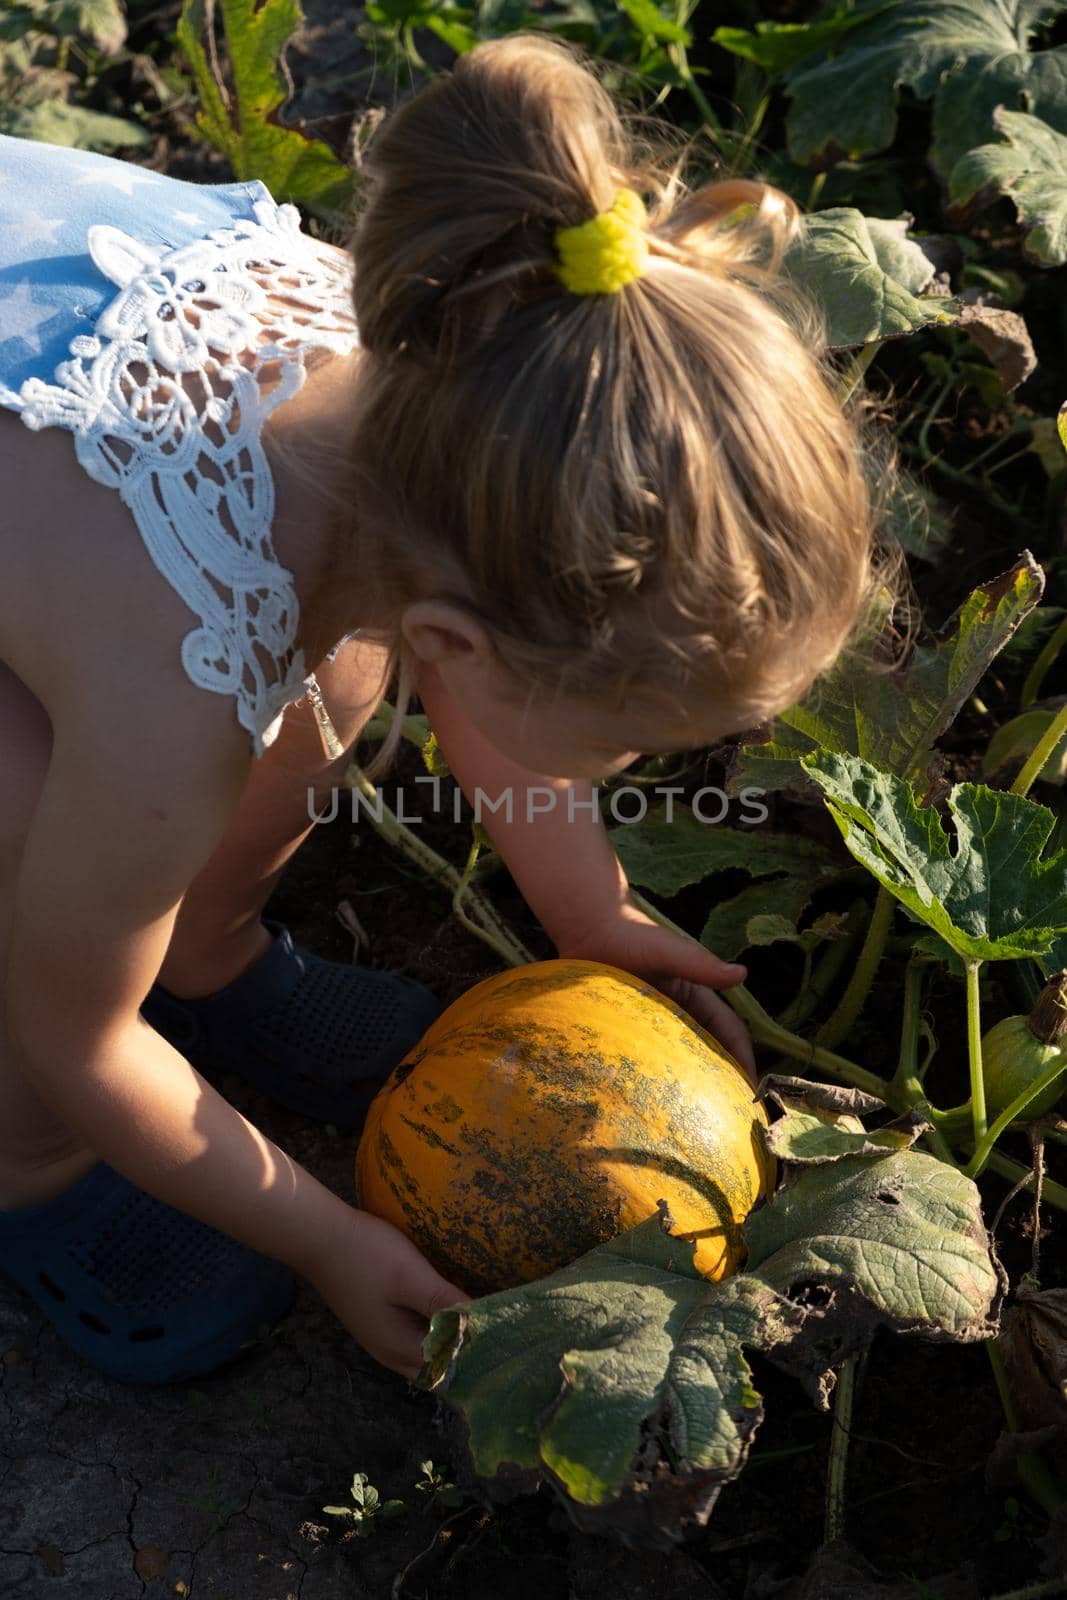 The girl takes in her hands an orange ripe pumpkin in the garden. Thanksgiving and autumn harvest concept.